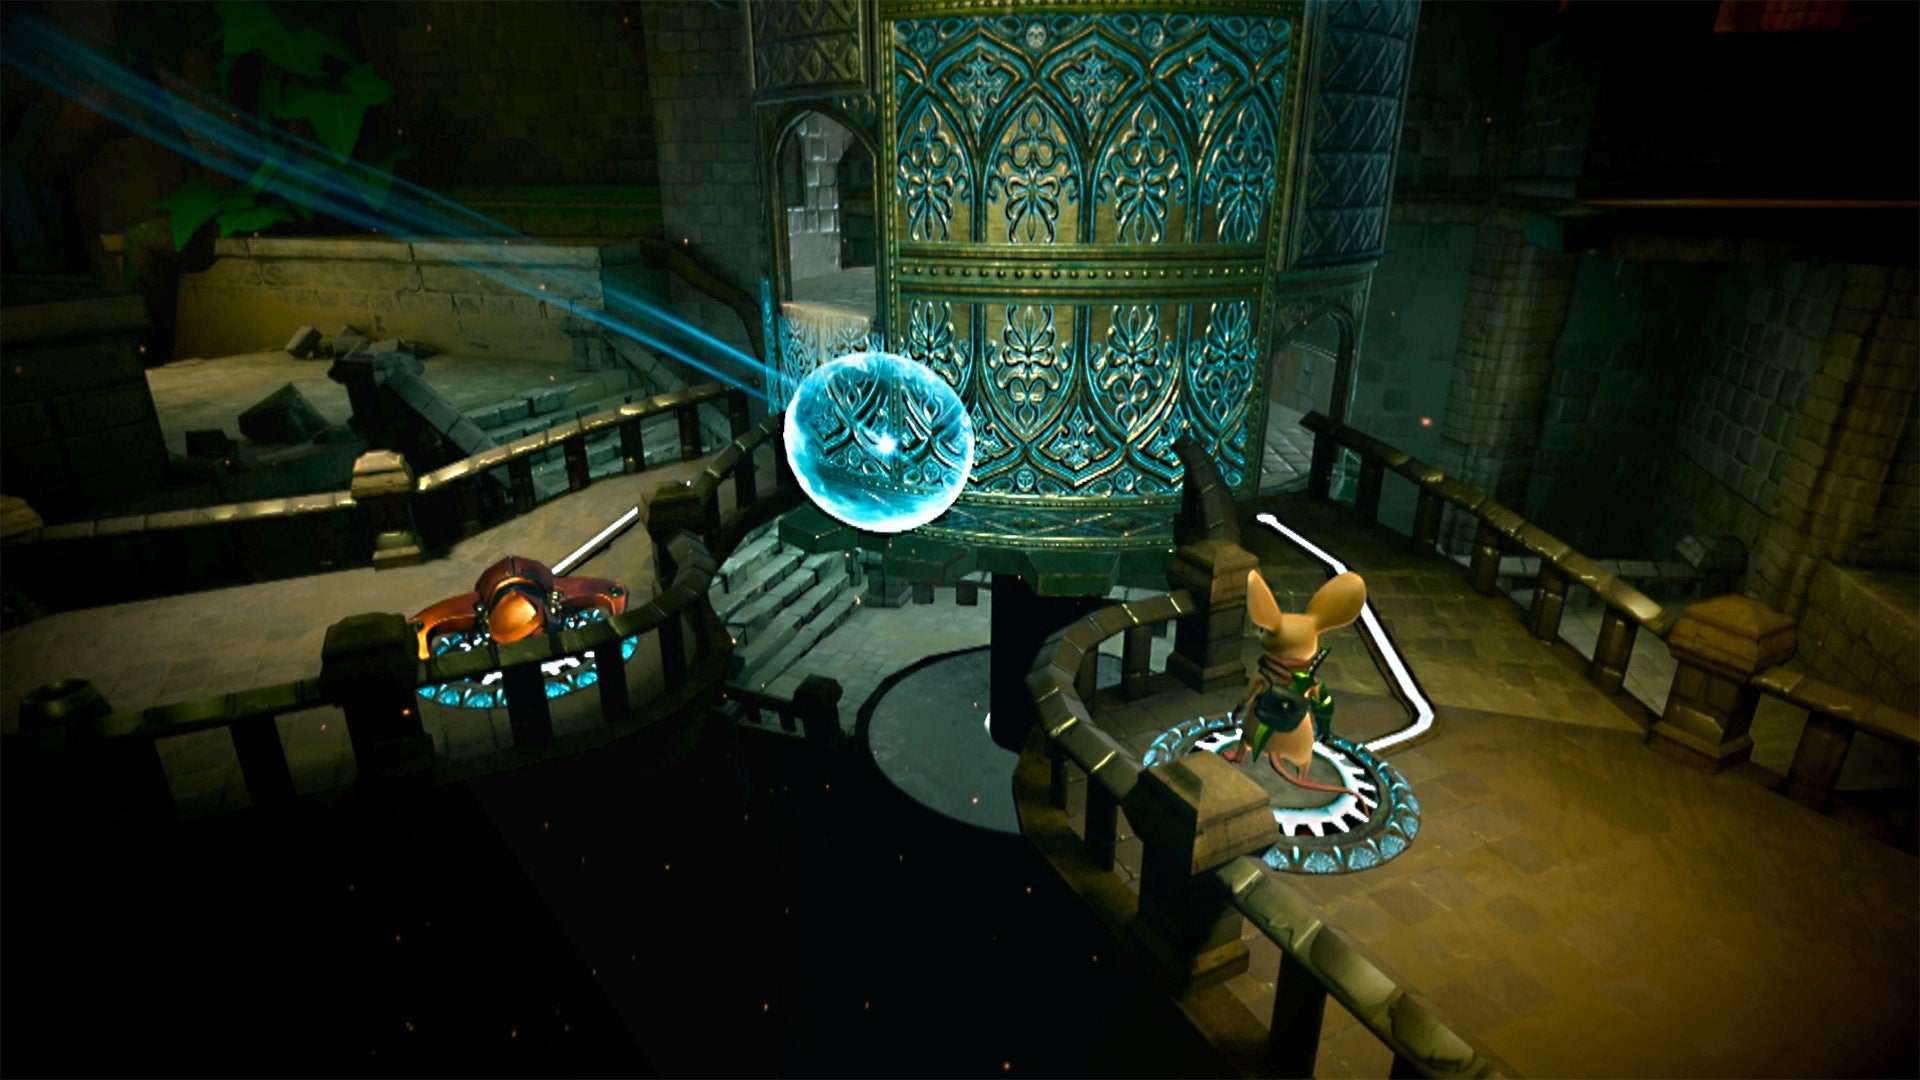 Screenshot from the video game Moss showing a puzzle scene.